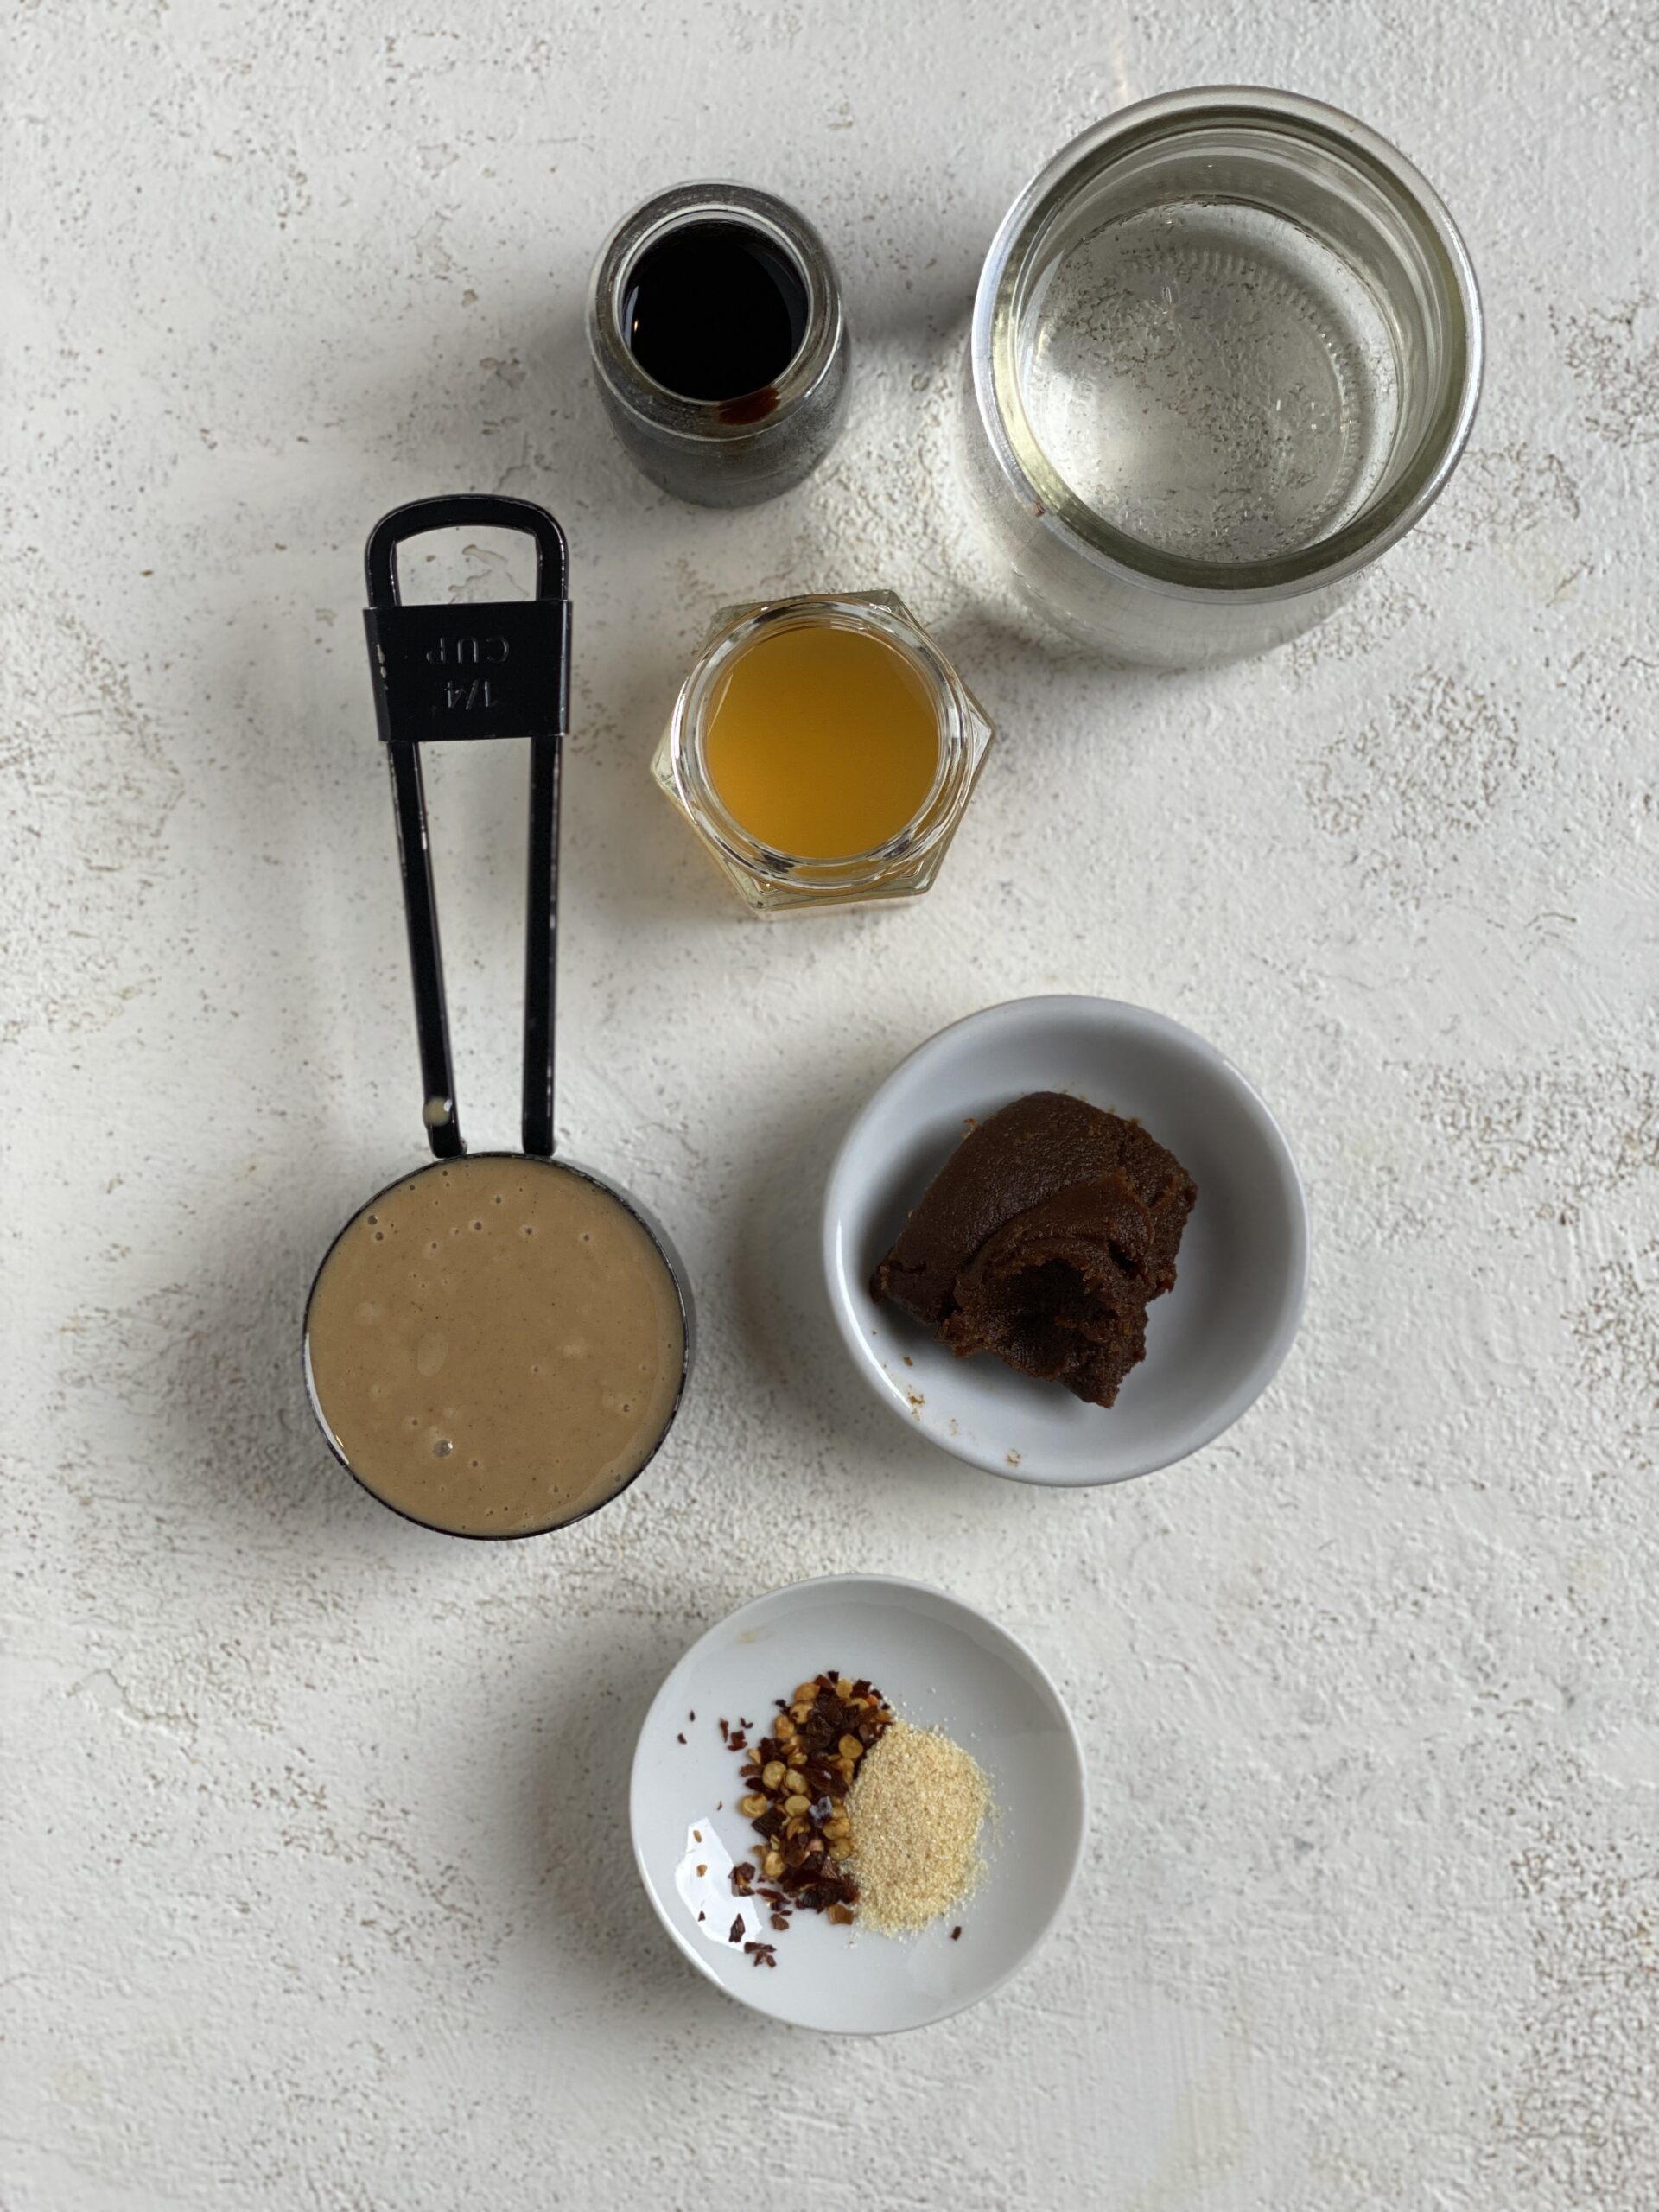 ingredients for Miso Tahini Dressing measured out against a light surface